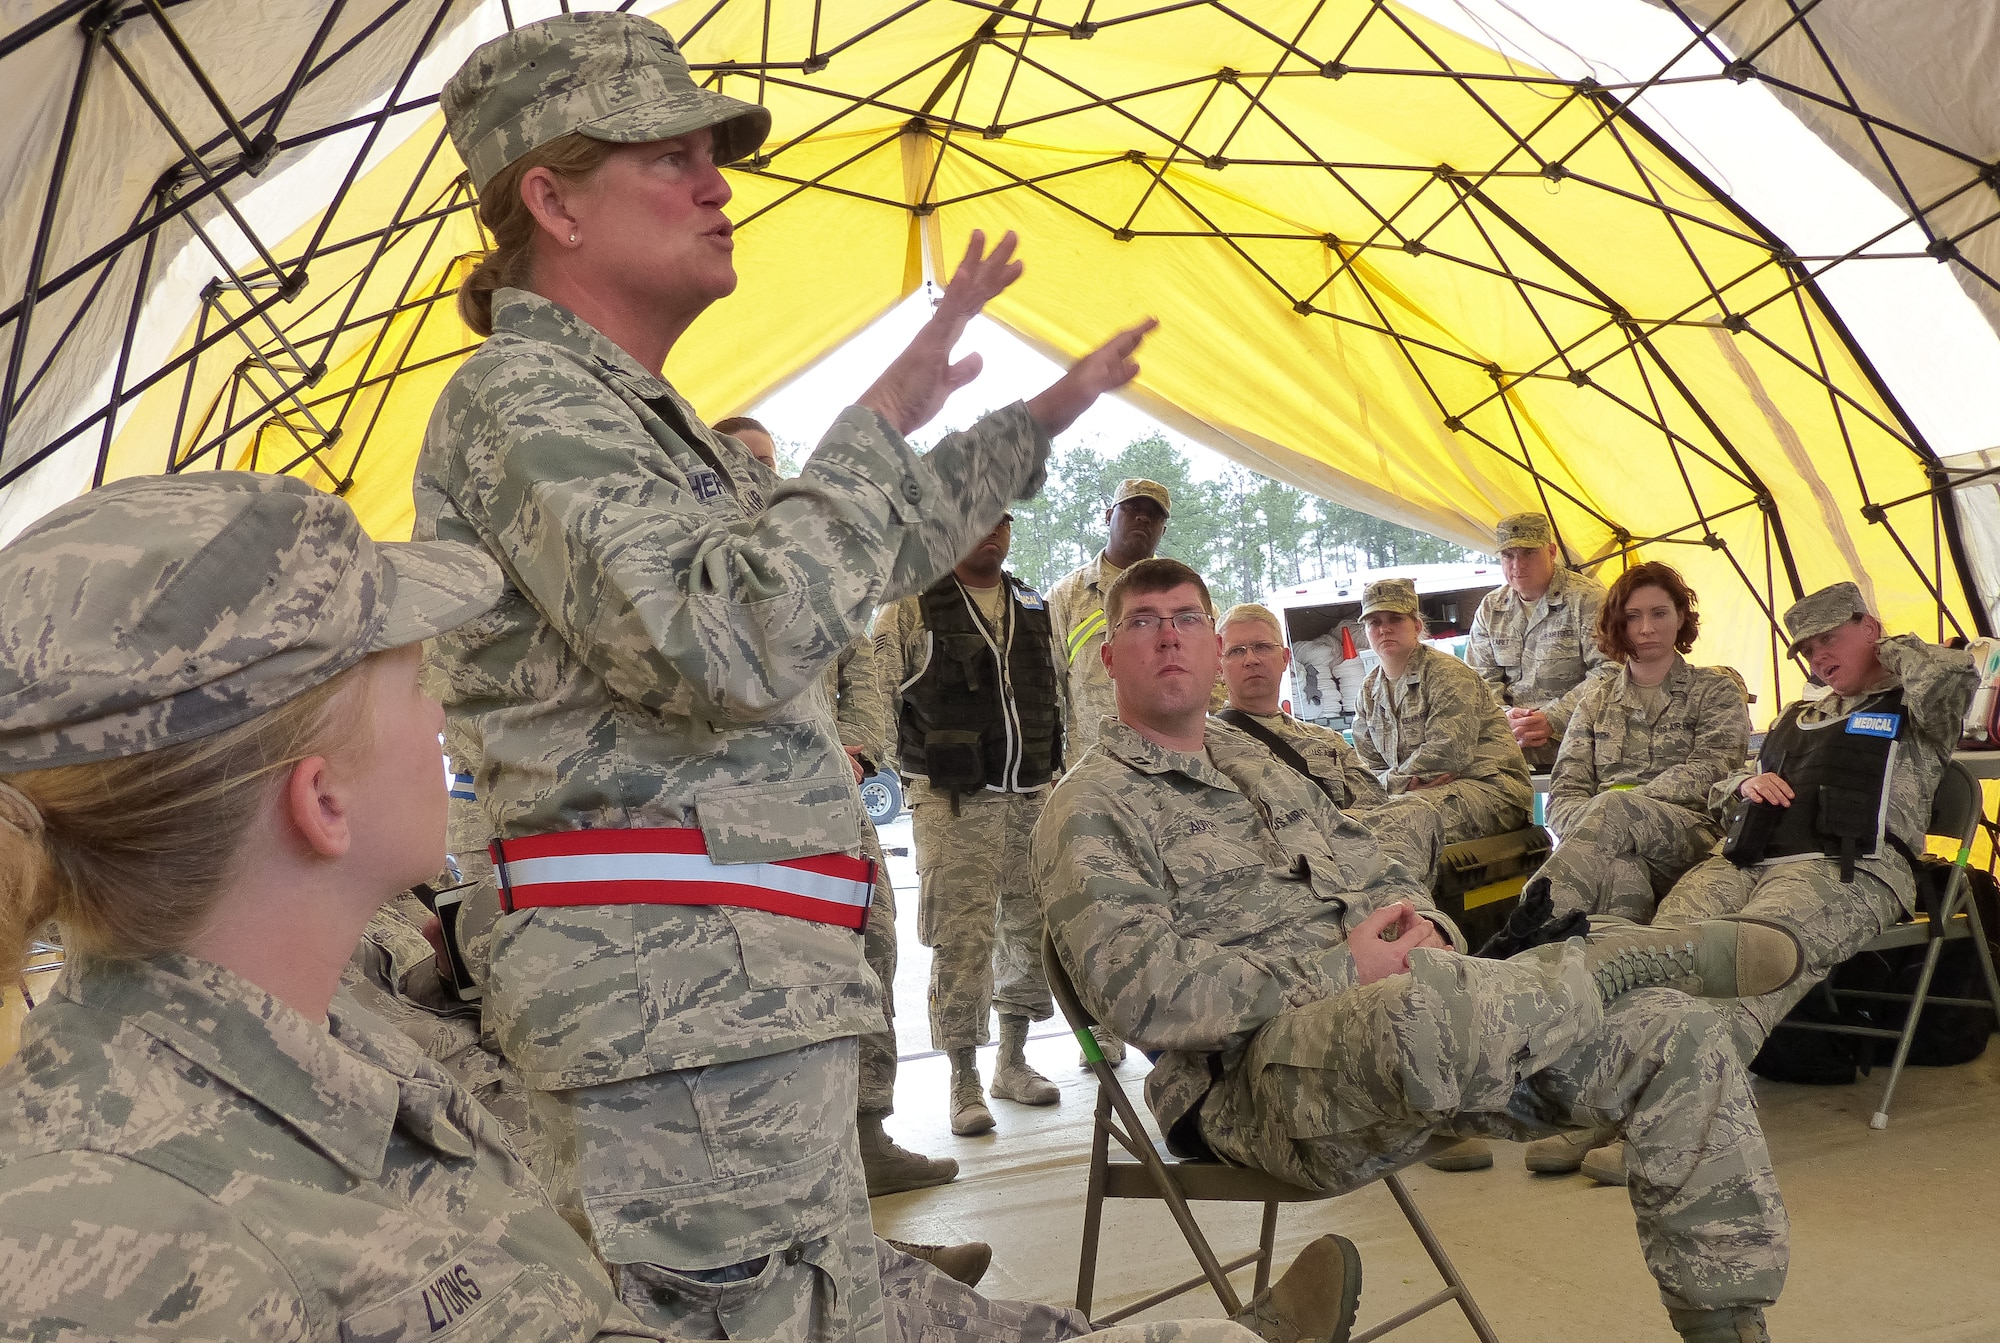 U.S. Air Force Col. Muriel Herman, commander 116th Medical Group, Georgia Air National Guard, briefs her medical team during Exercise Vigilant Guard 2015, Georgetown, S.C., March 11, 2015.  Vigilant Guard is a series of federally funded disaster-response drills conducted by National Guard units working with federal, state and local emergency management agencies and first responders. (U.S. Air National Guard photo contributed/Released)